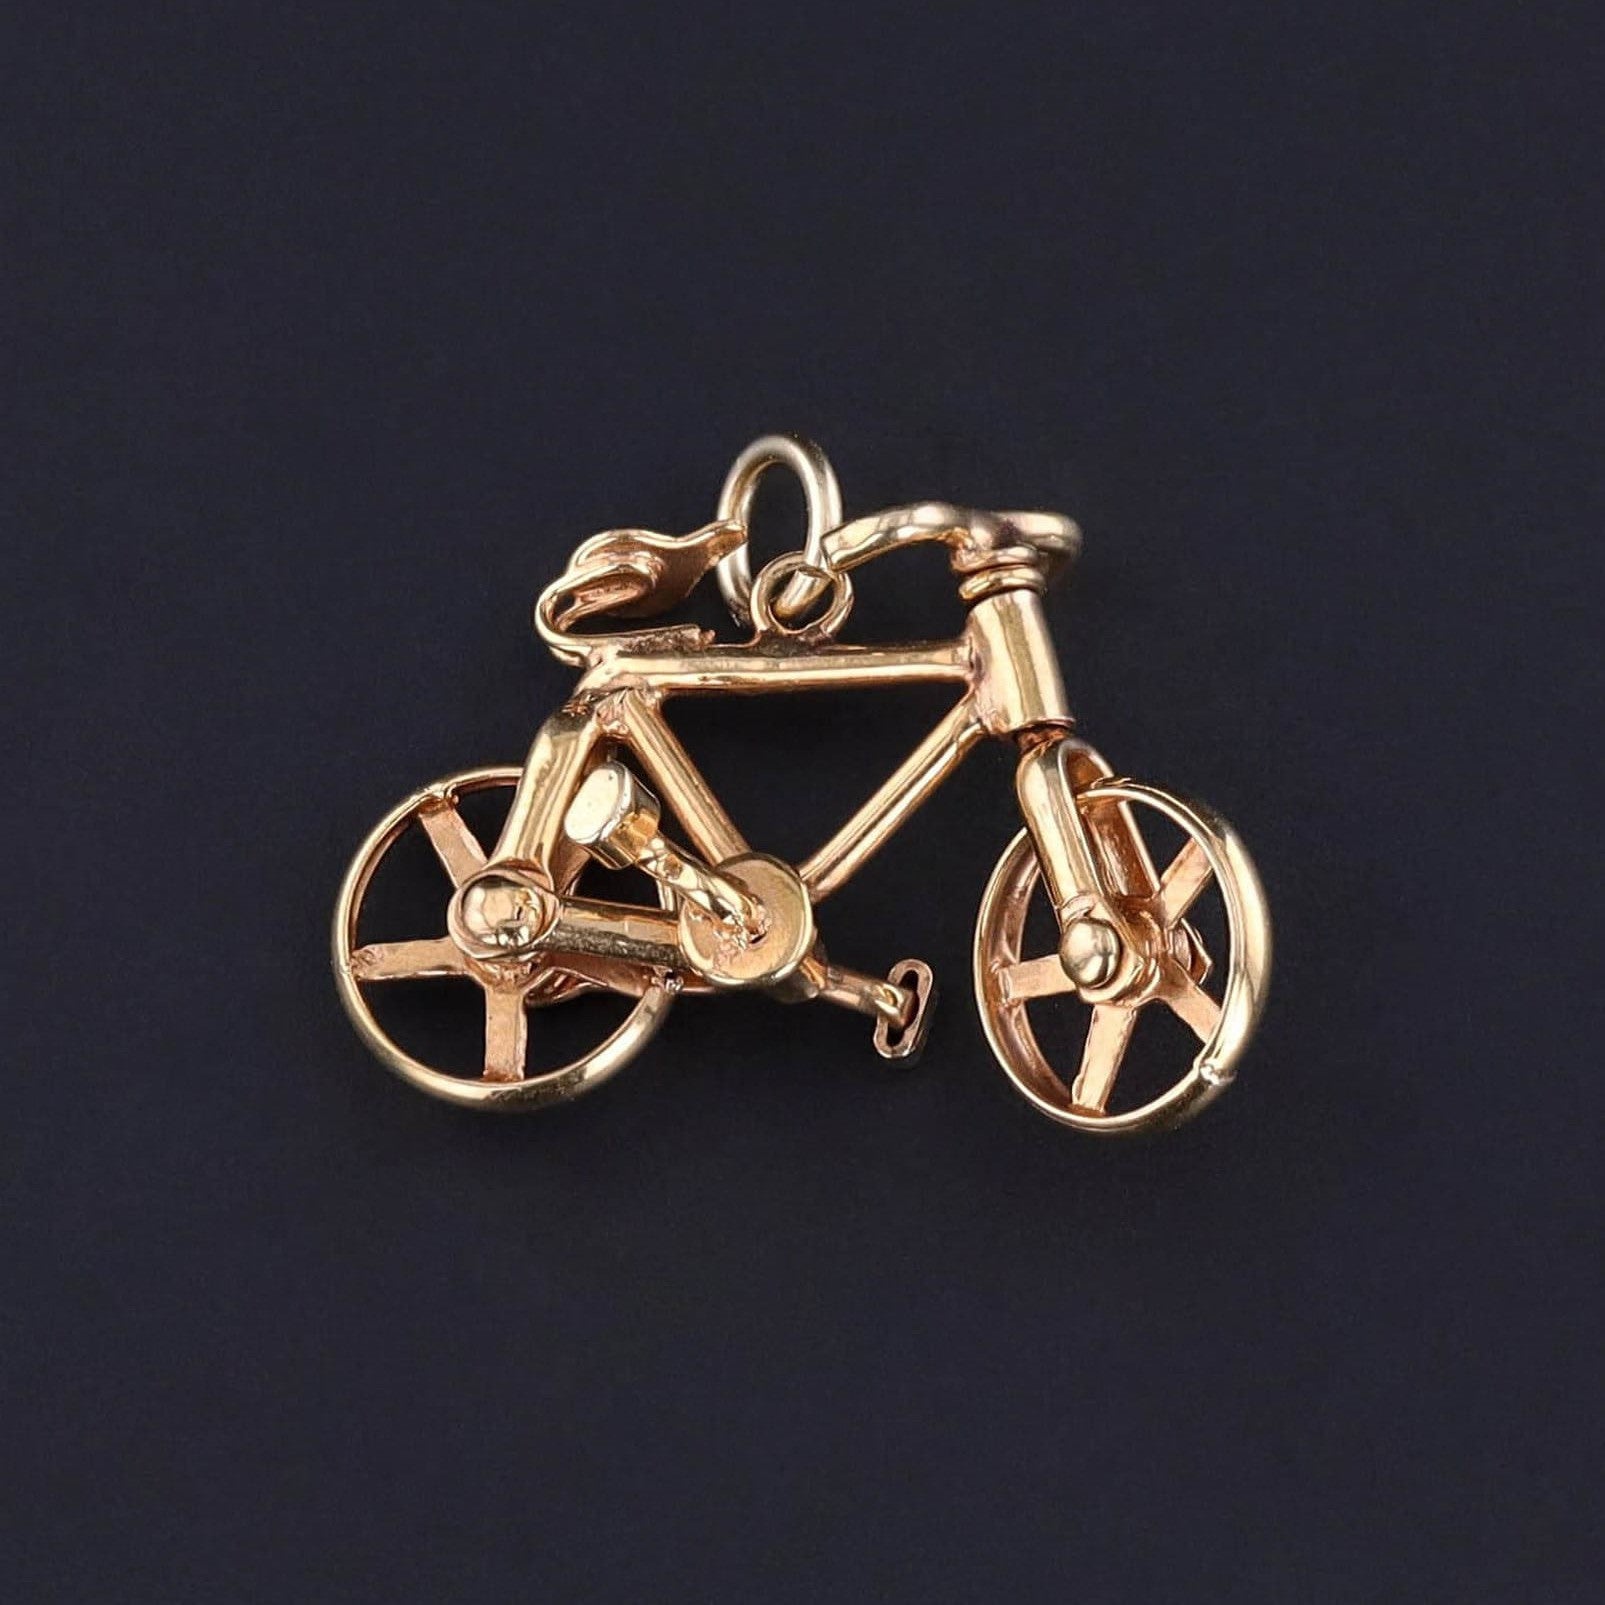 Vintage Moveable Bicycle Charm of 10k Gold